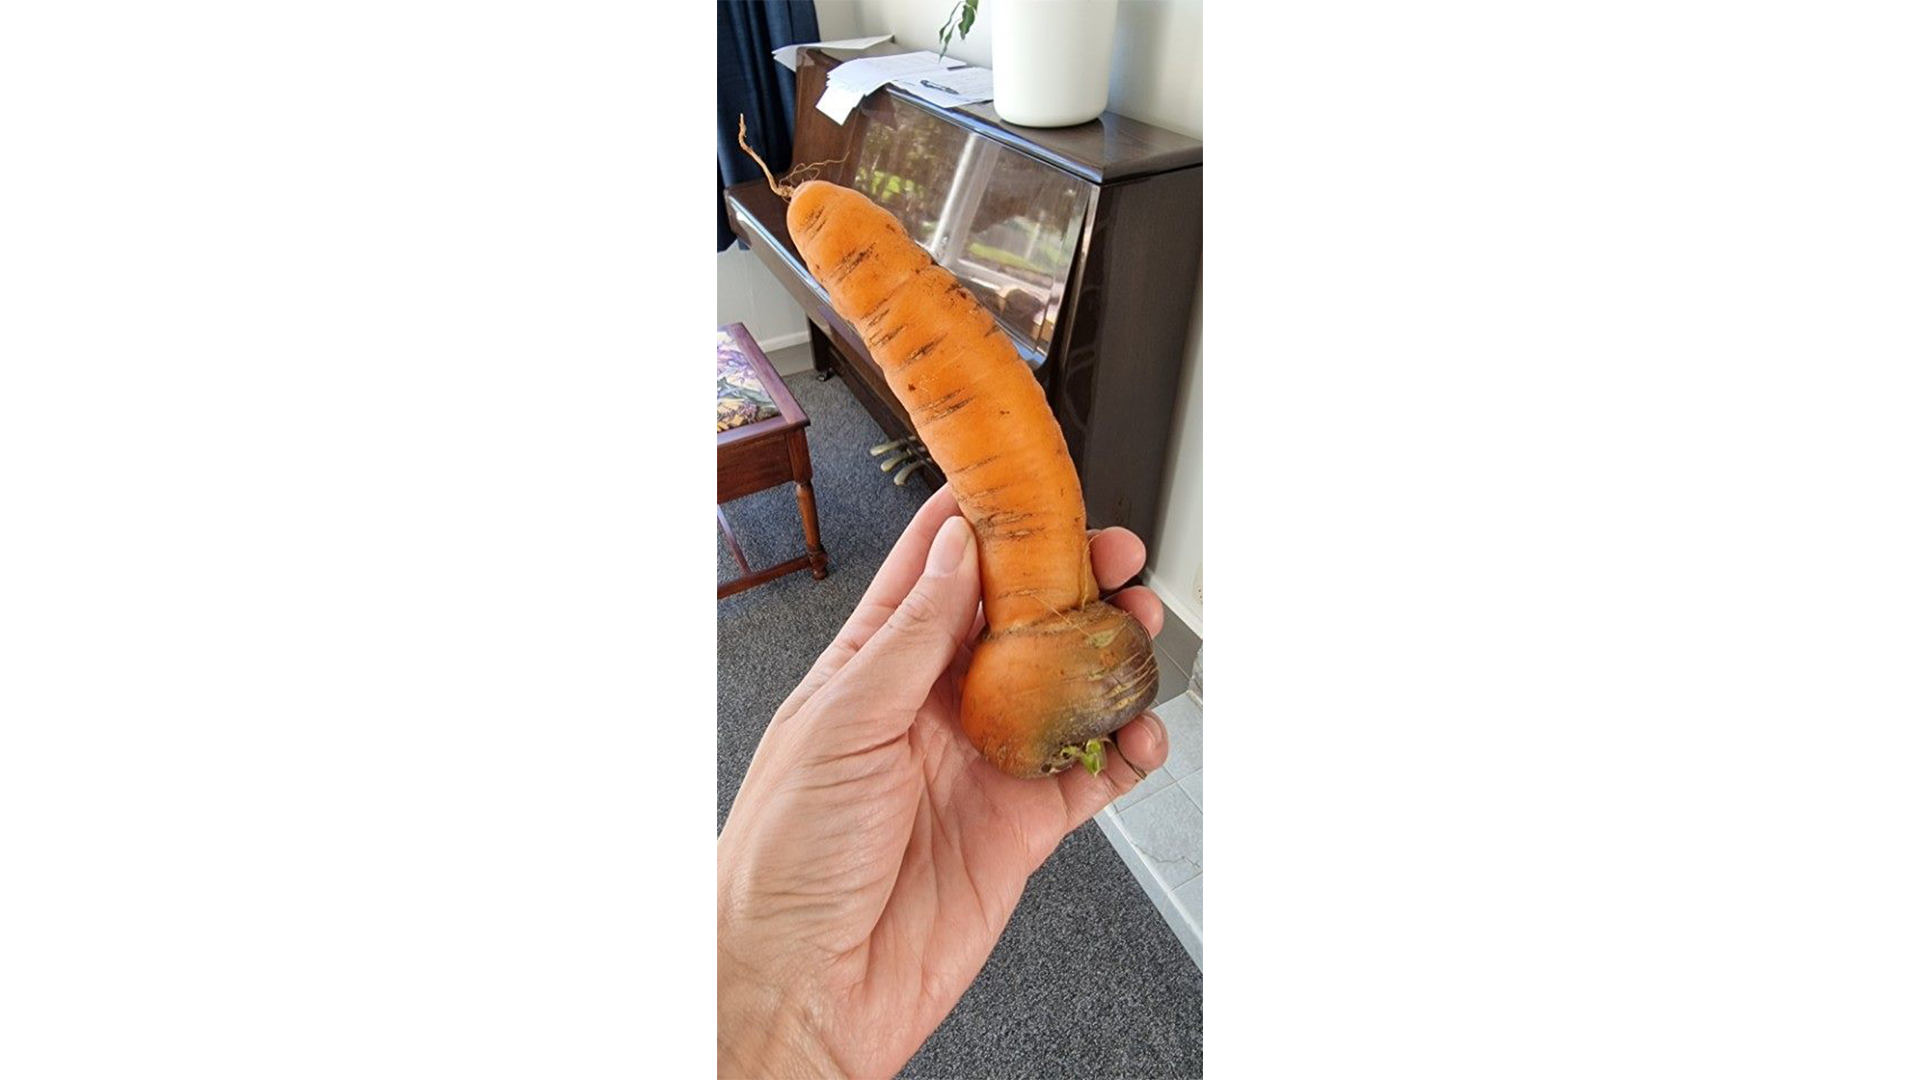 Phallic-shaped carrot auction on Trade Me raising funds for prostate cancer research.